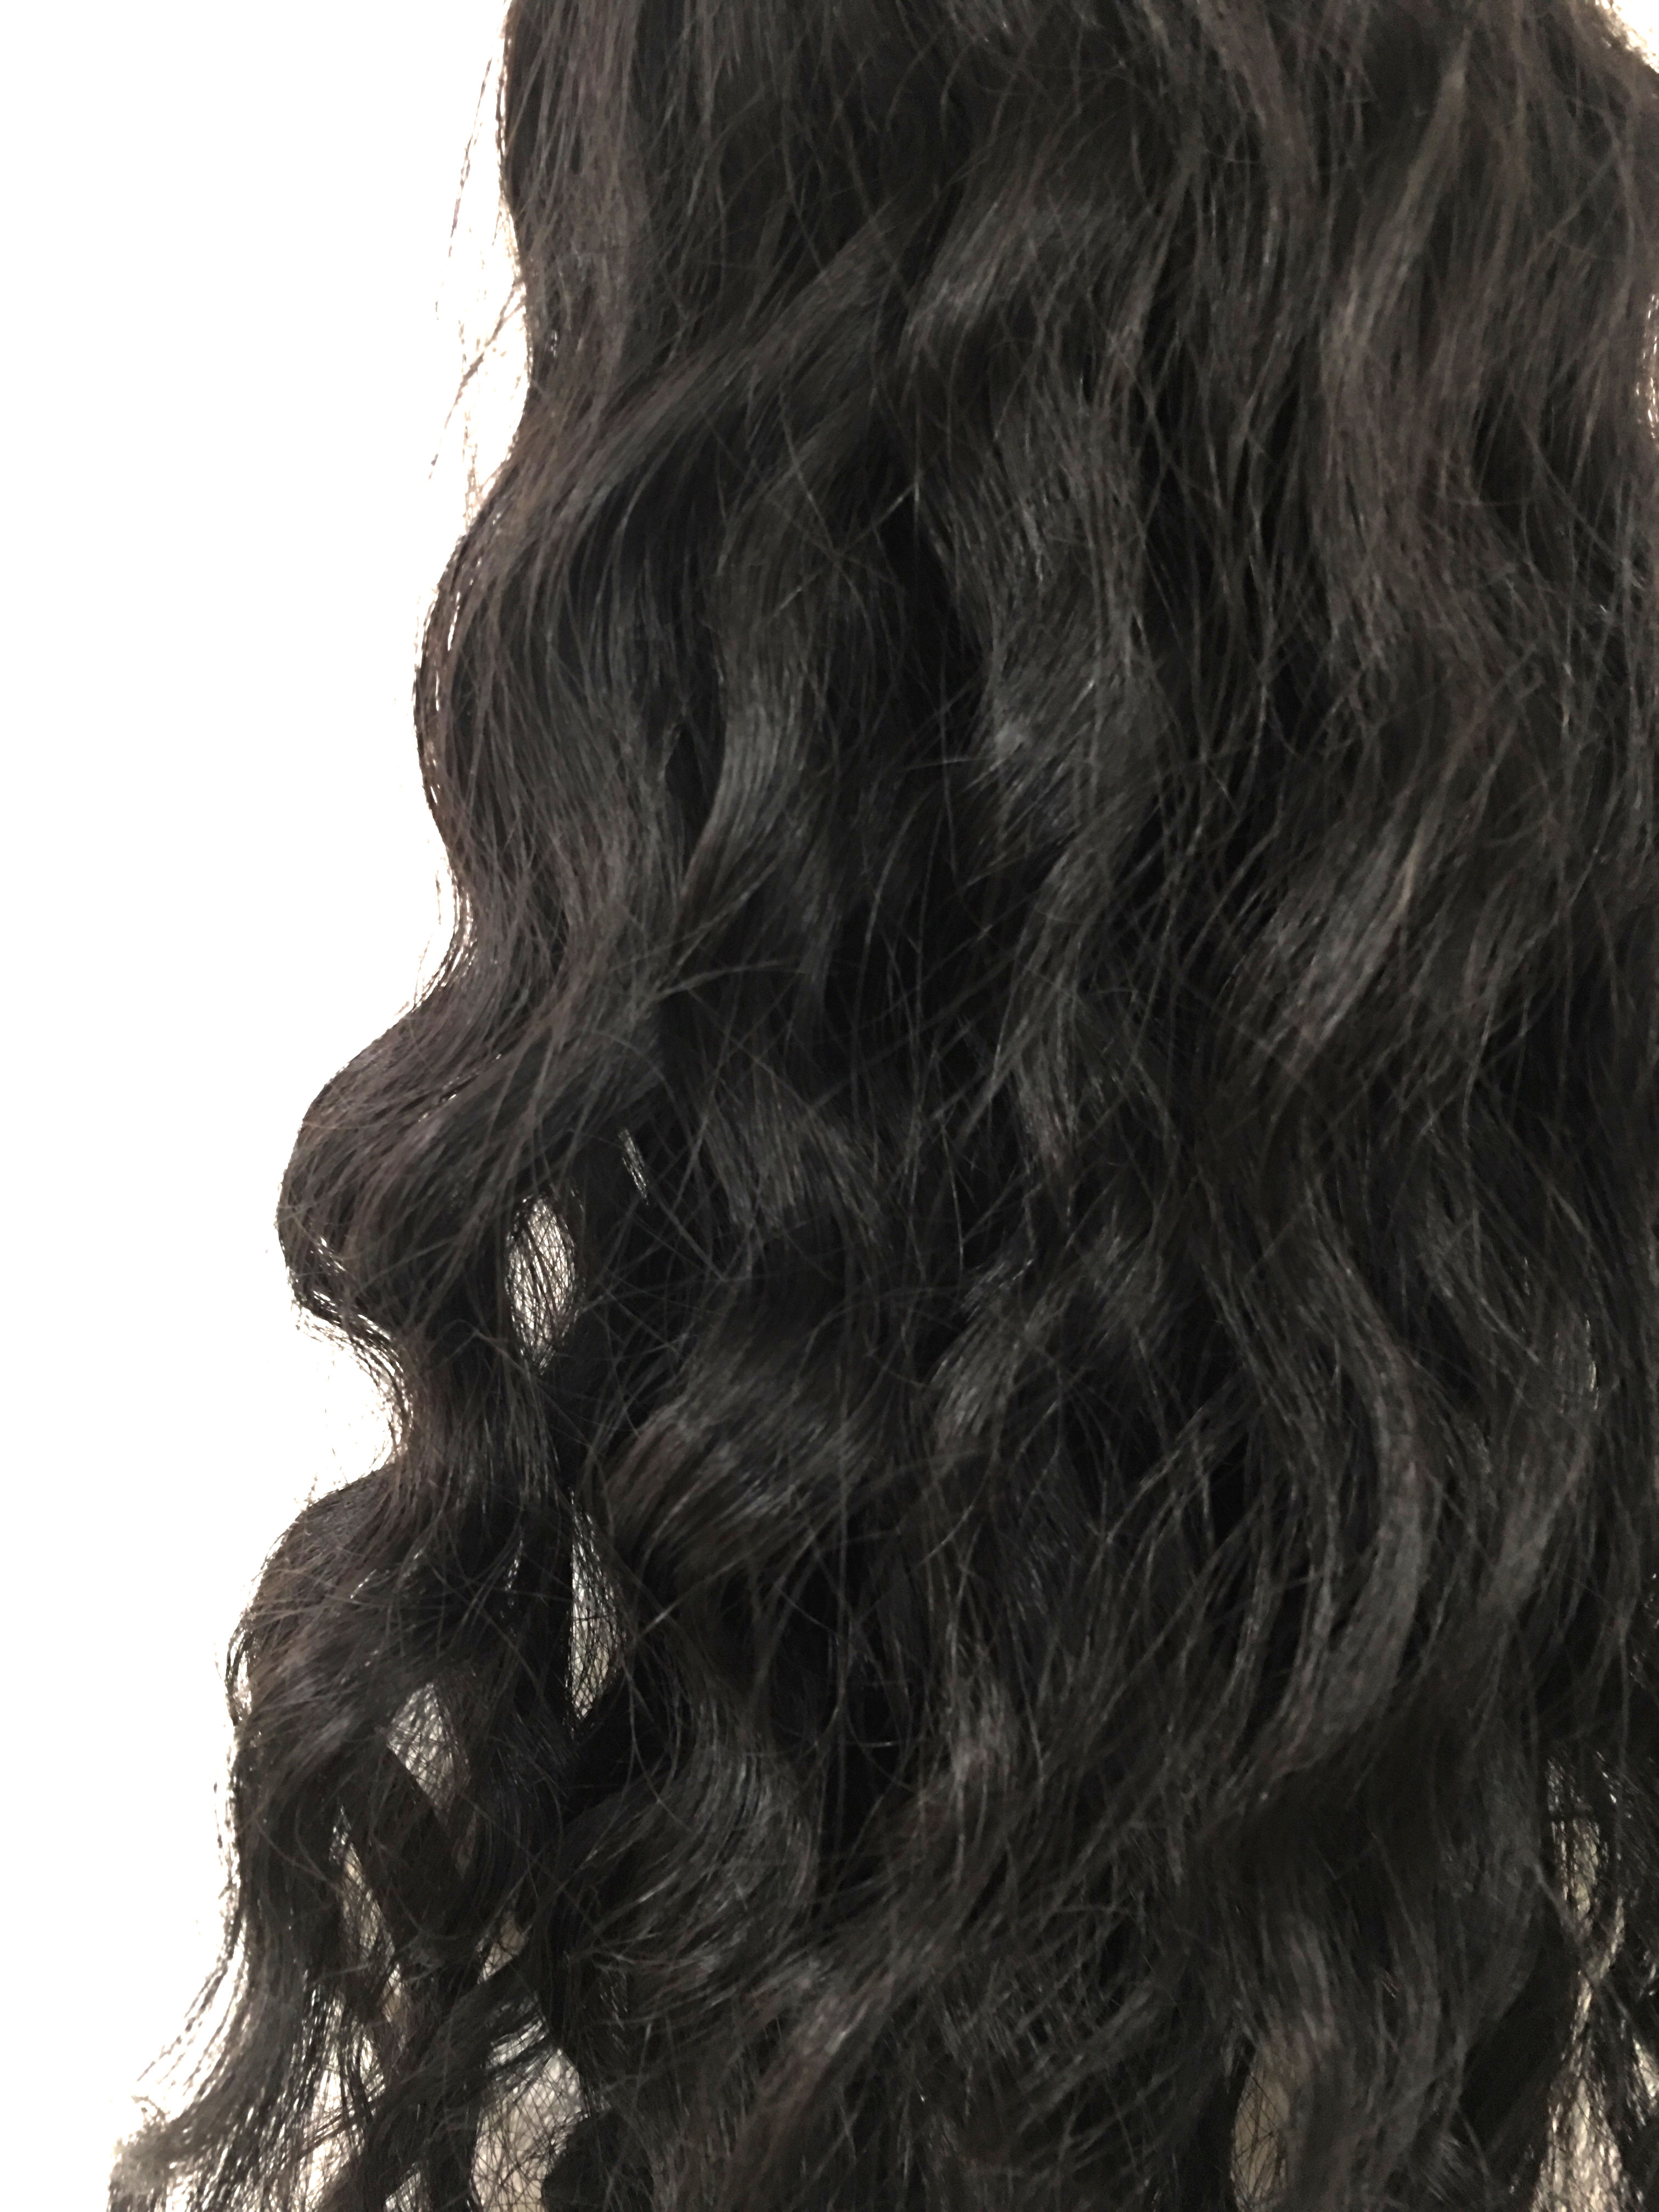 Virgin uncoloured brazilian virgin remy human hair weft 24inches curly wavy or straight